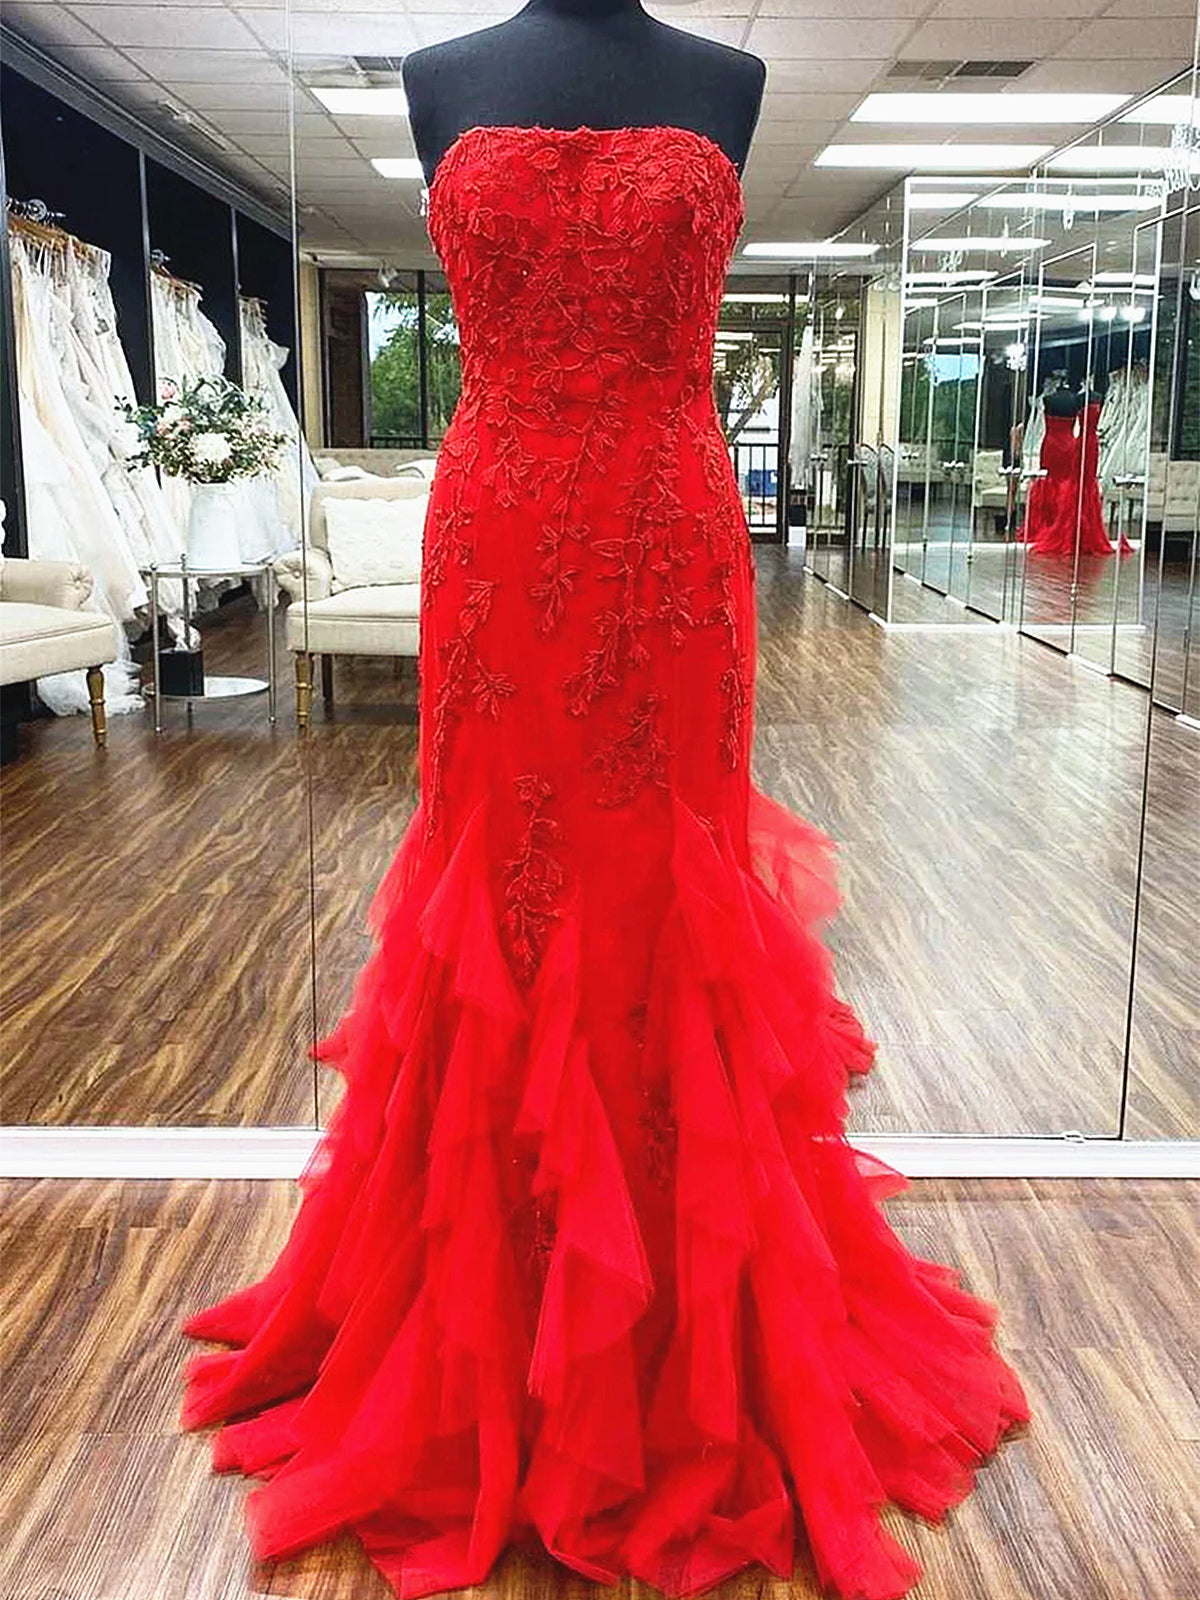 Strappy Lace Appliqued Red Short Homecoming Dress – FancyVestido